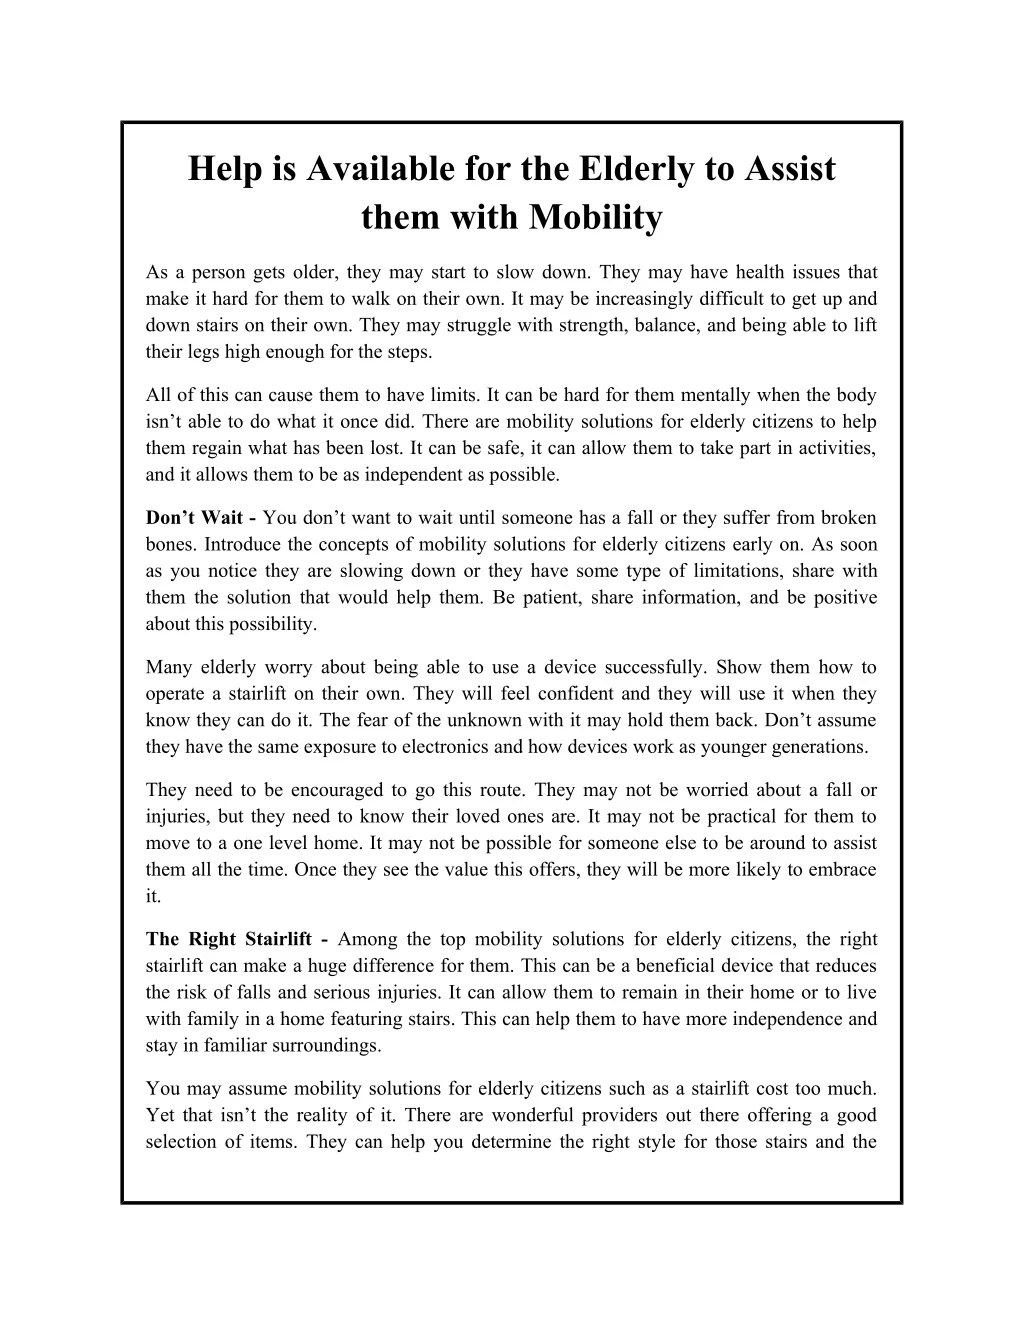 help is available for the elderly to assist them